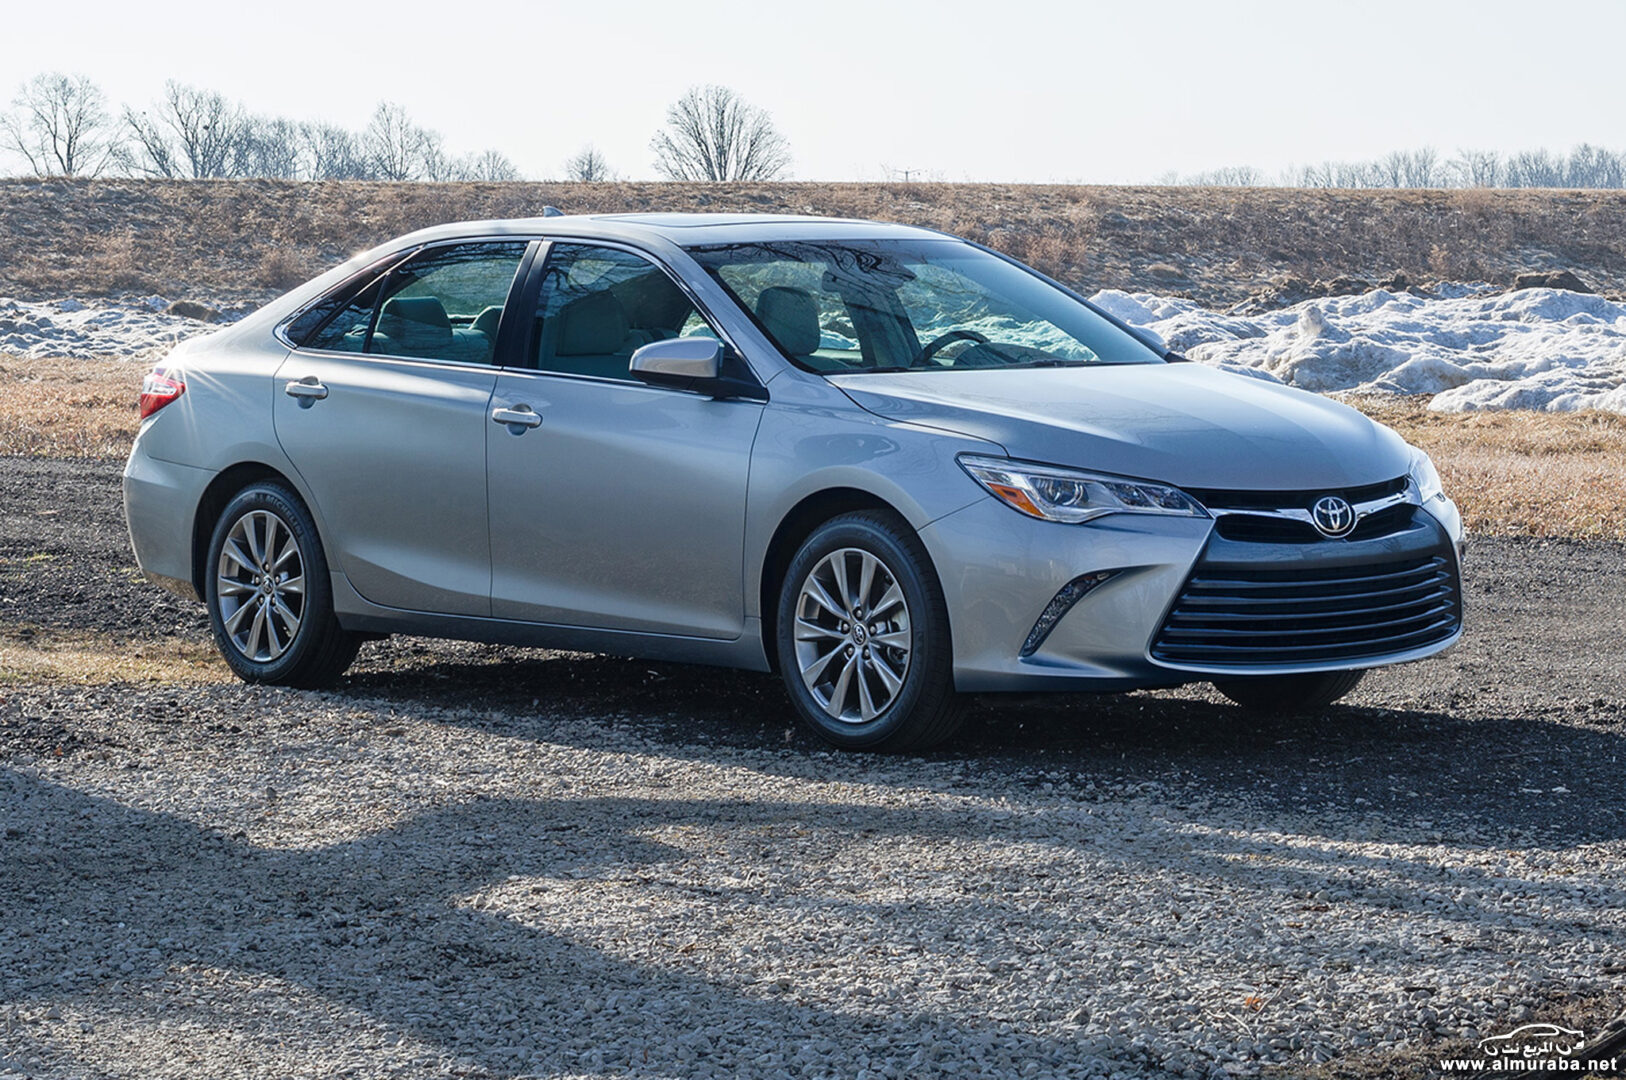 http---image.motortrend.com-f-roadtests-sedans-1404_2015_toyota_camry_first_look-72627087-2015-Toyota-Camry-XLE-front-side-view